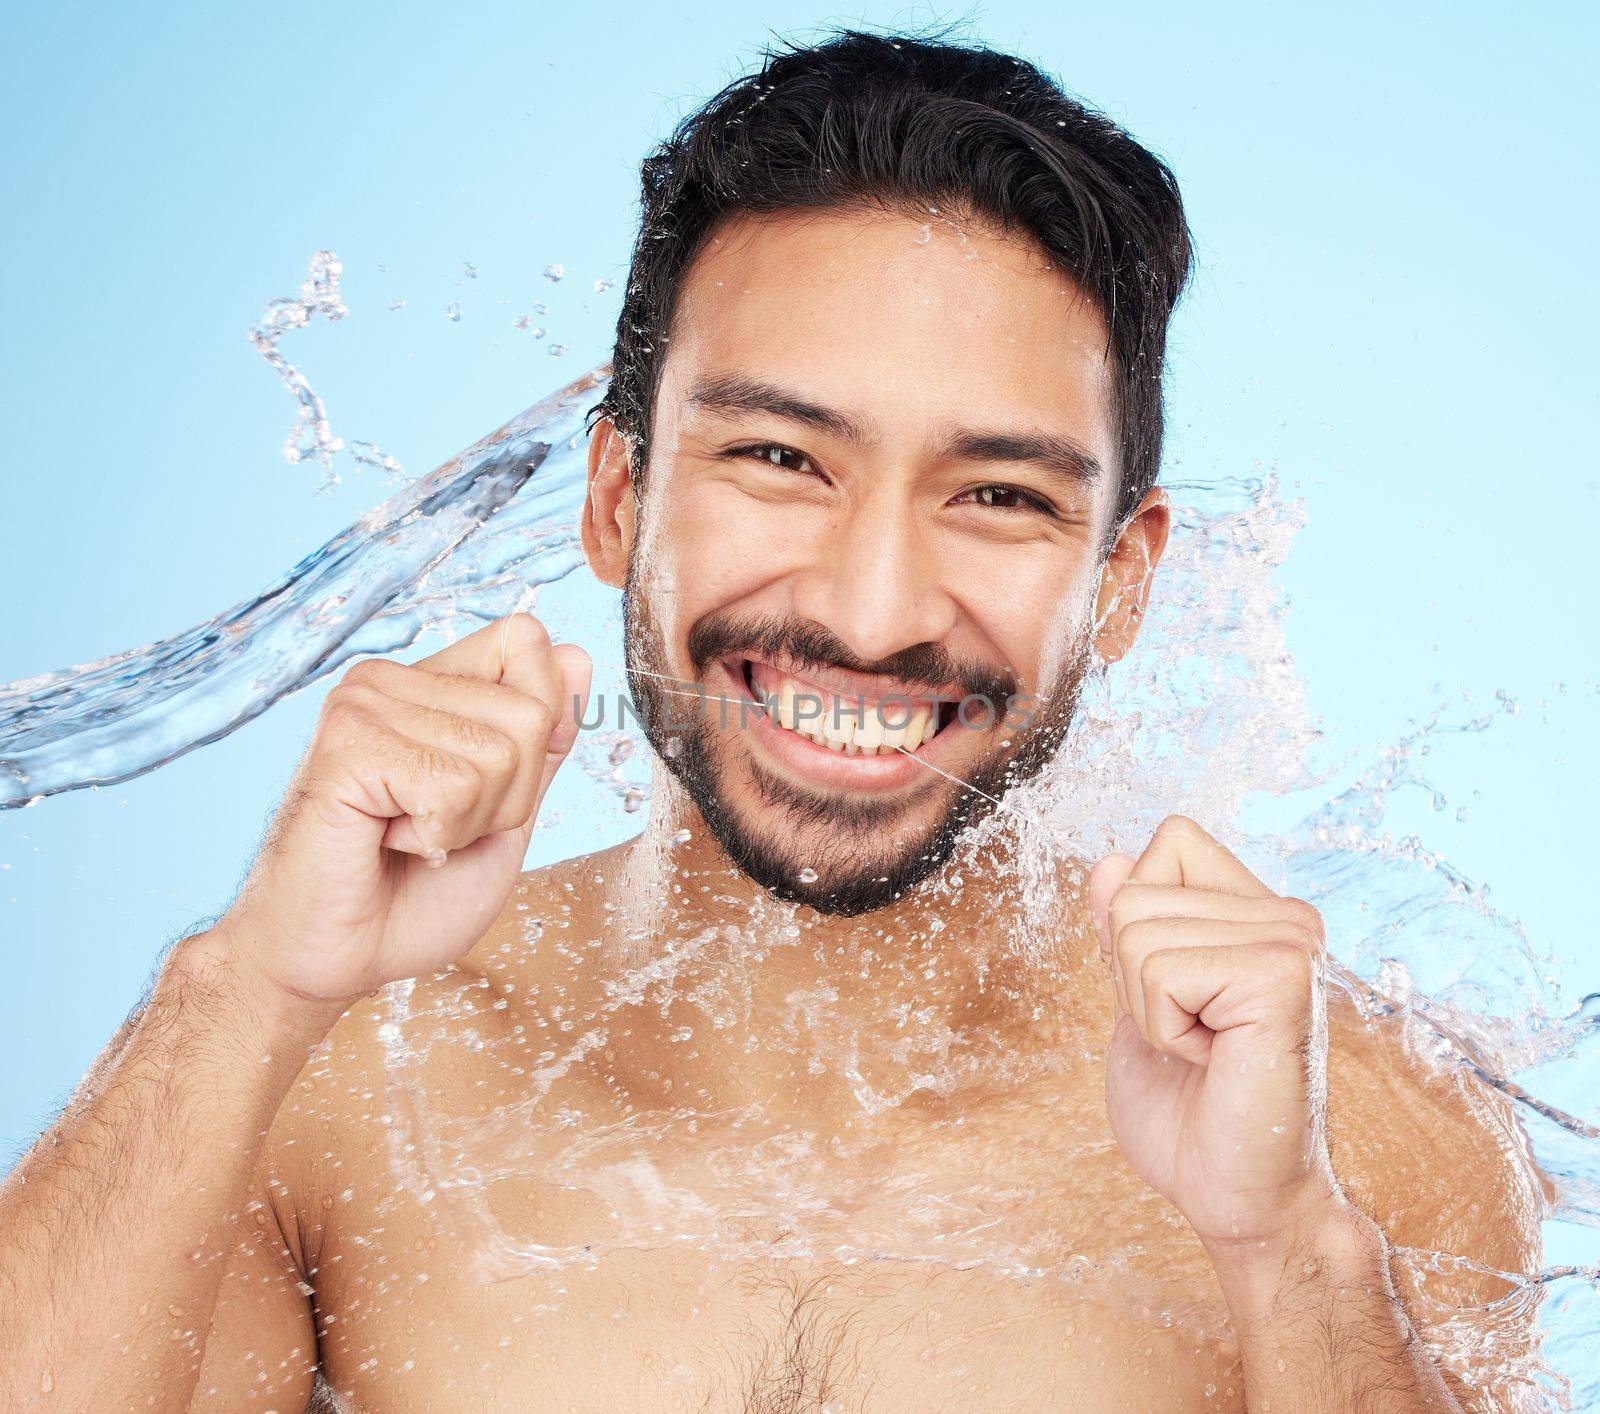 Dental, teeth floss and water splash with man in portrait for hygiene, cleaning and oral healthcare against studio background. Teeth whitening, clean mouth and fresh breath with smile and Invisalign.